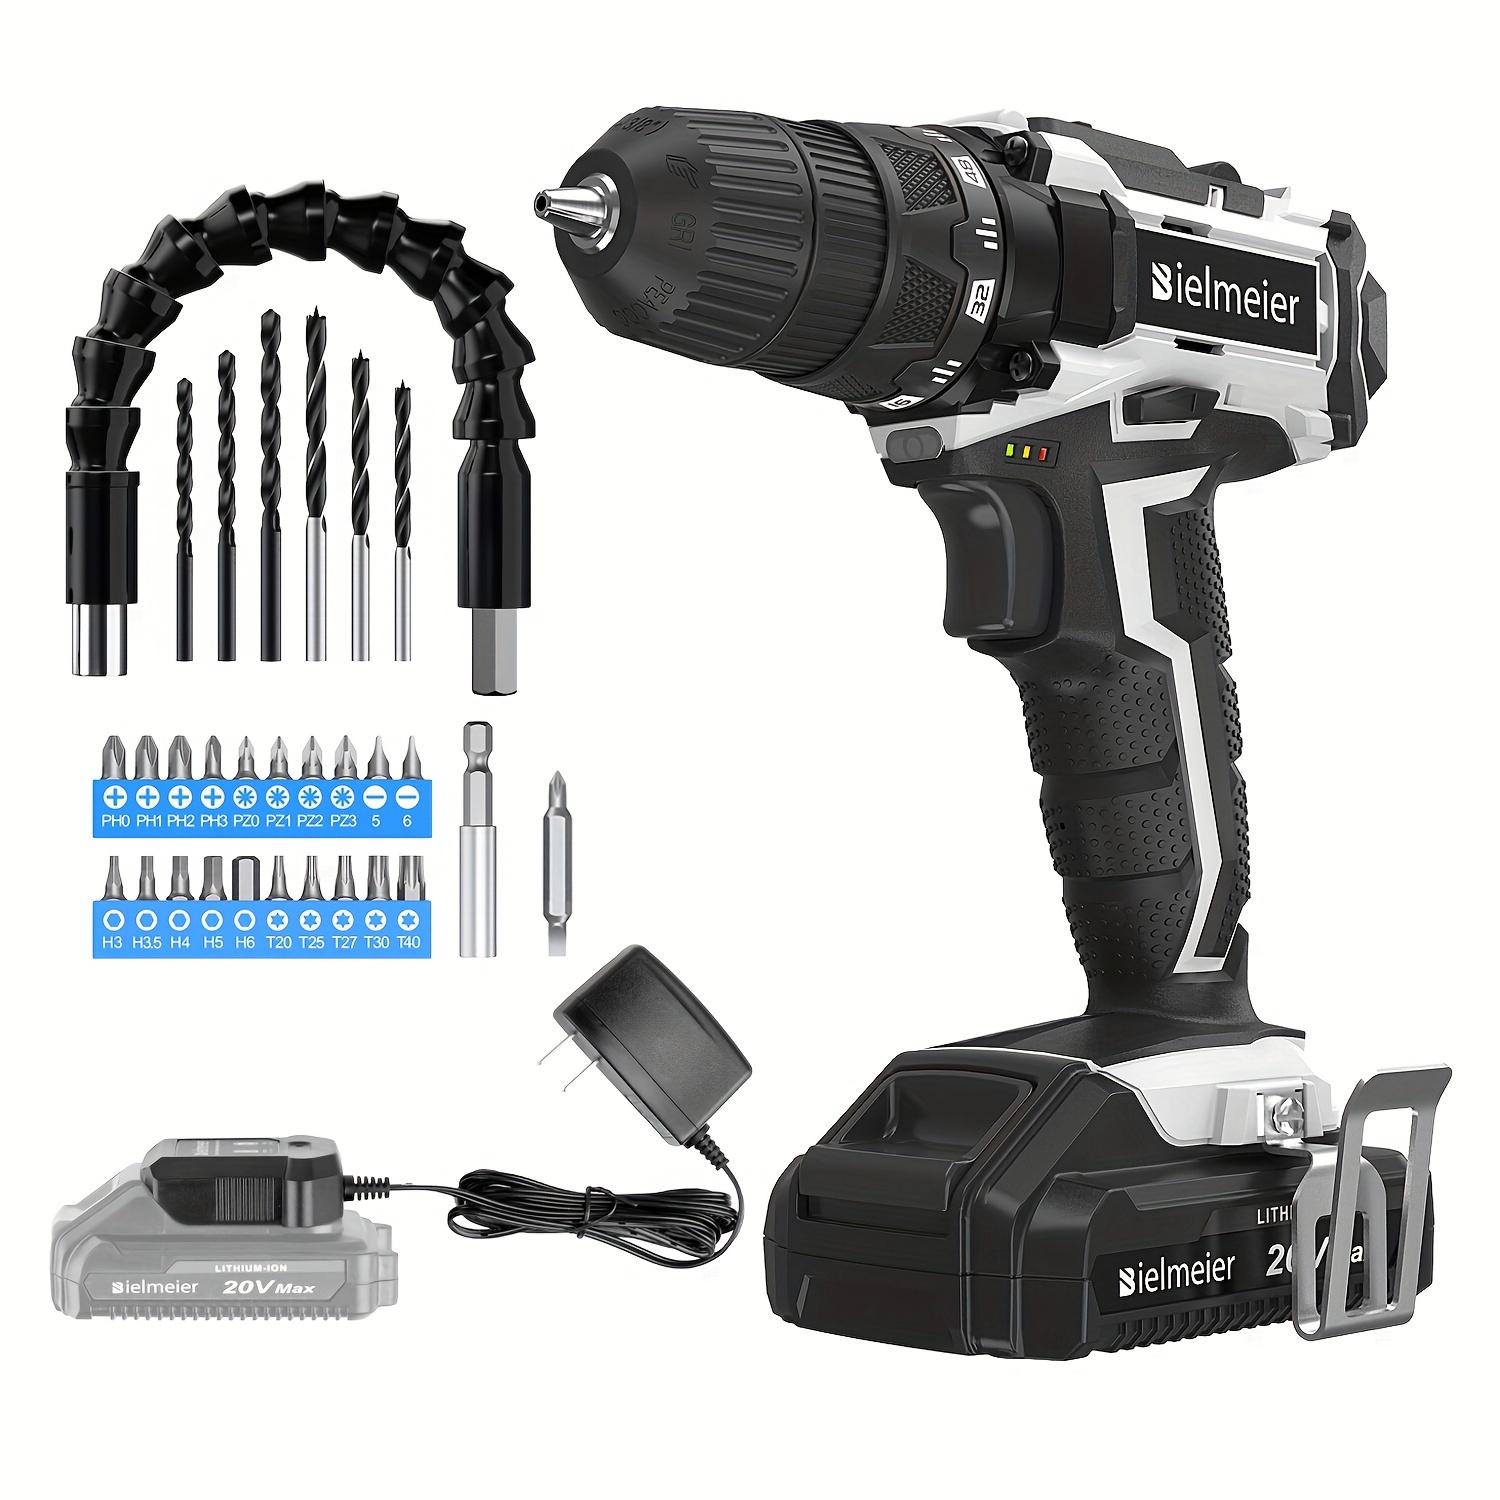 

1pc Bielmeier 20v Max Cordless Electric Drill Set With Led Light - Electric Drill, Variable Speed, 64+1 Position, 3/8" Keyless Chuck, Flex Shaft, 28pcs Drill Bits, Battery & Charger Included